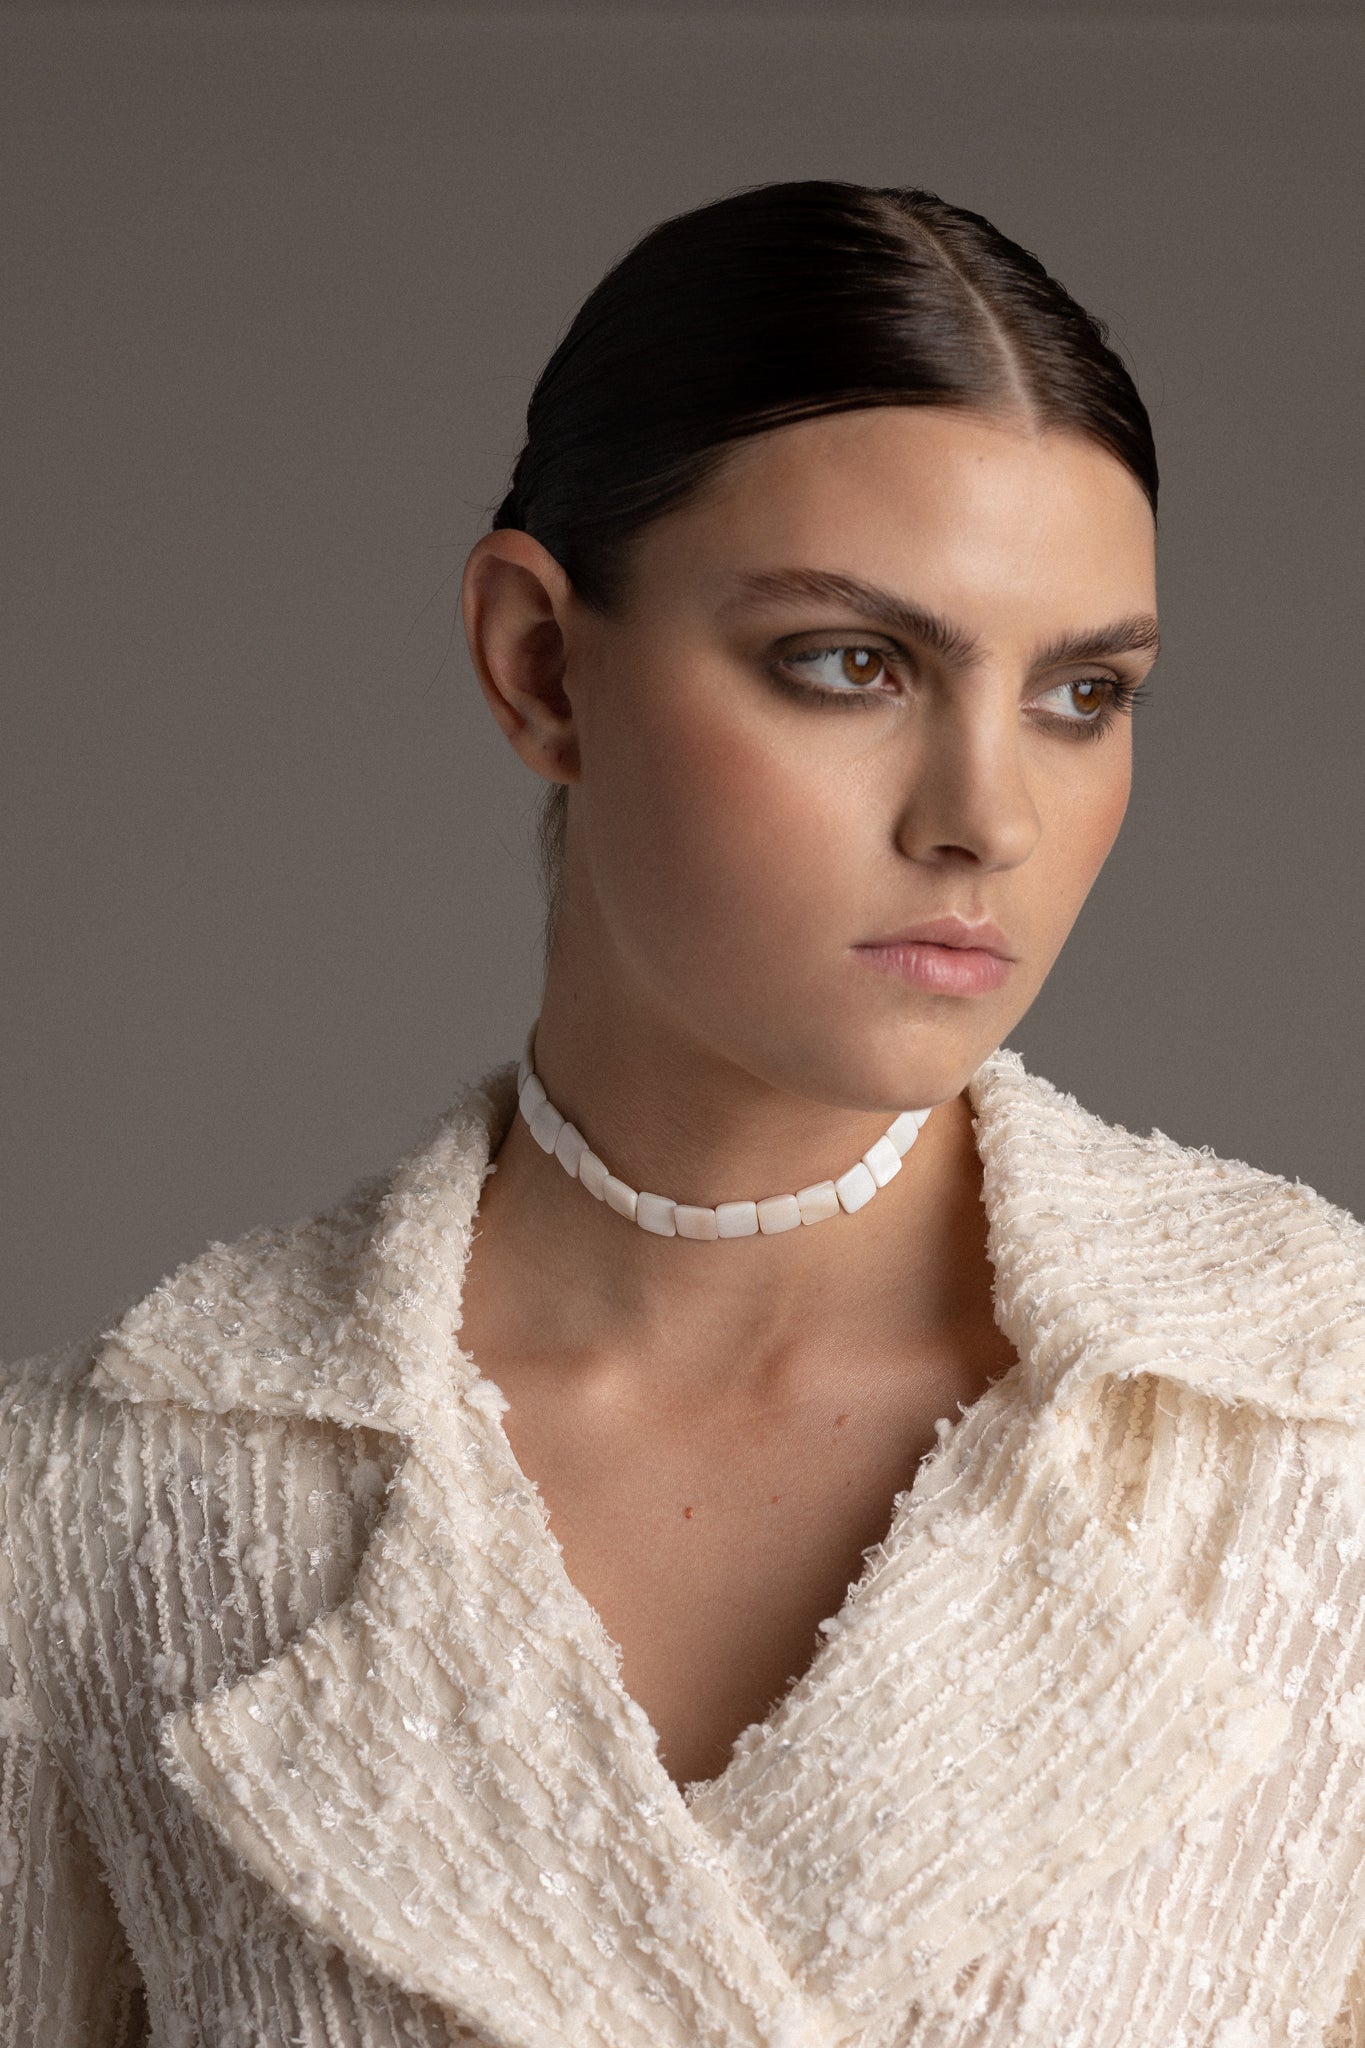 Crafted from genuine mother-of-pearl shells, this choker features square-shaped natural shell beads that capture a distinctive charm. 